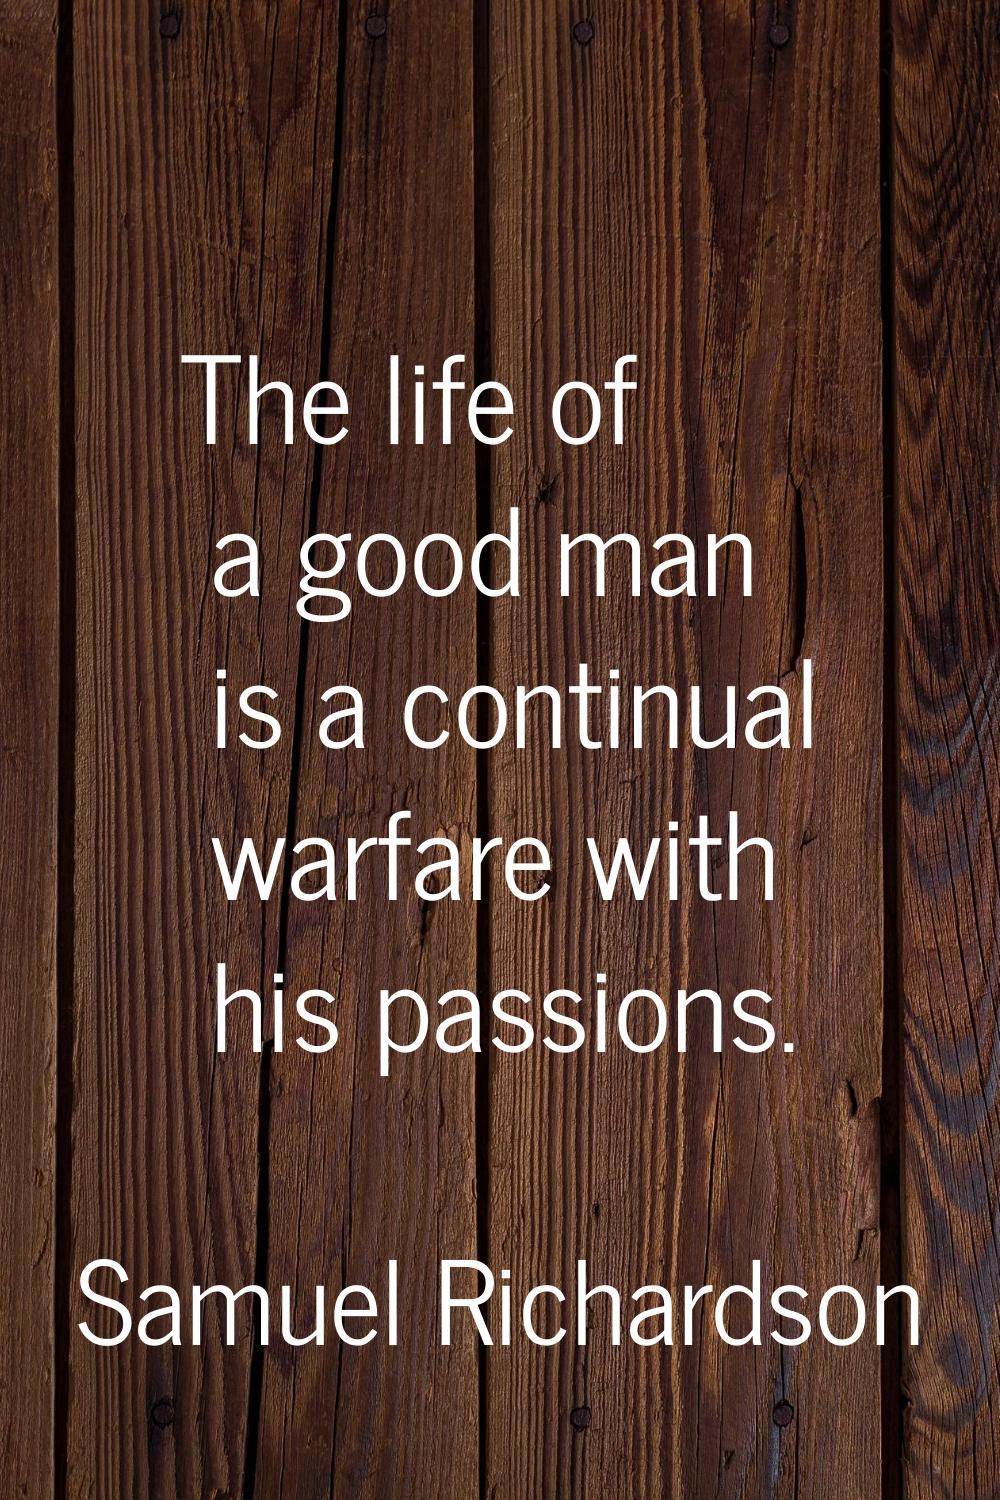 The life of a good man is a continual warfare with his passions.